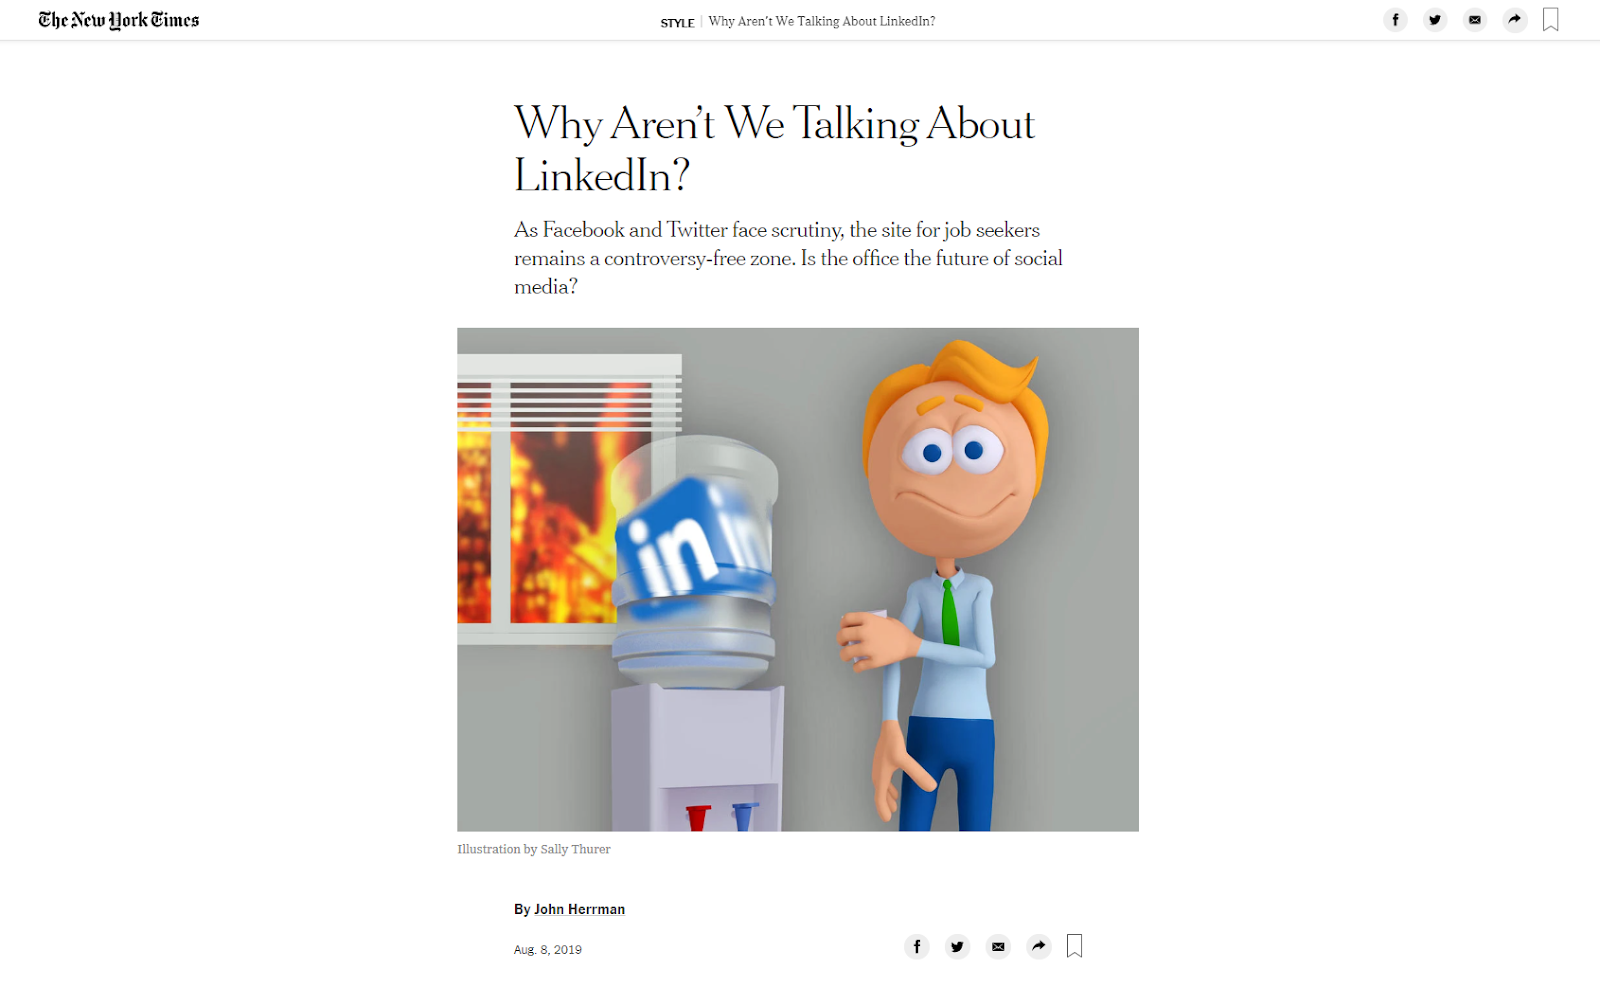 New York Times' article about "Why aren't we talking about LinkedIn?"